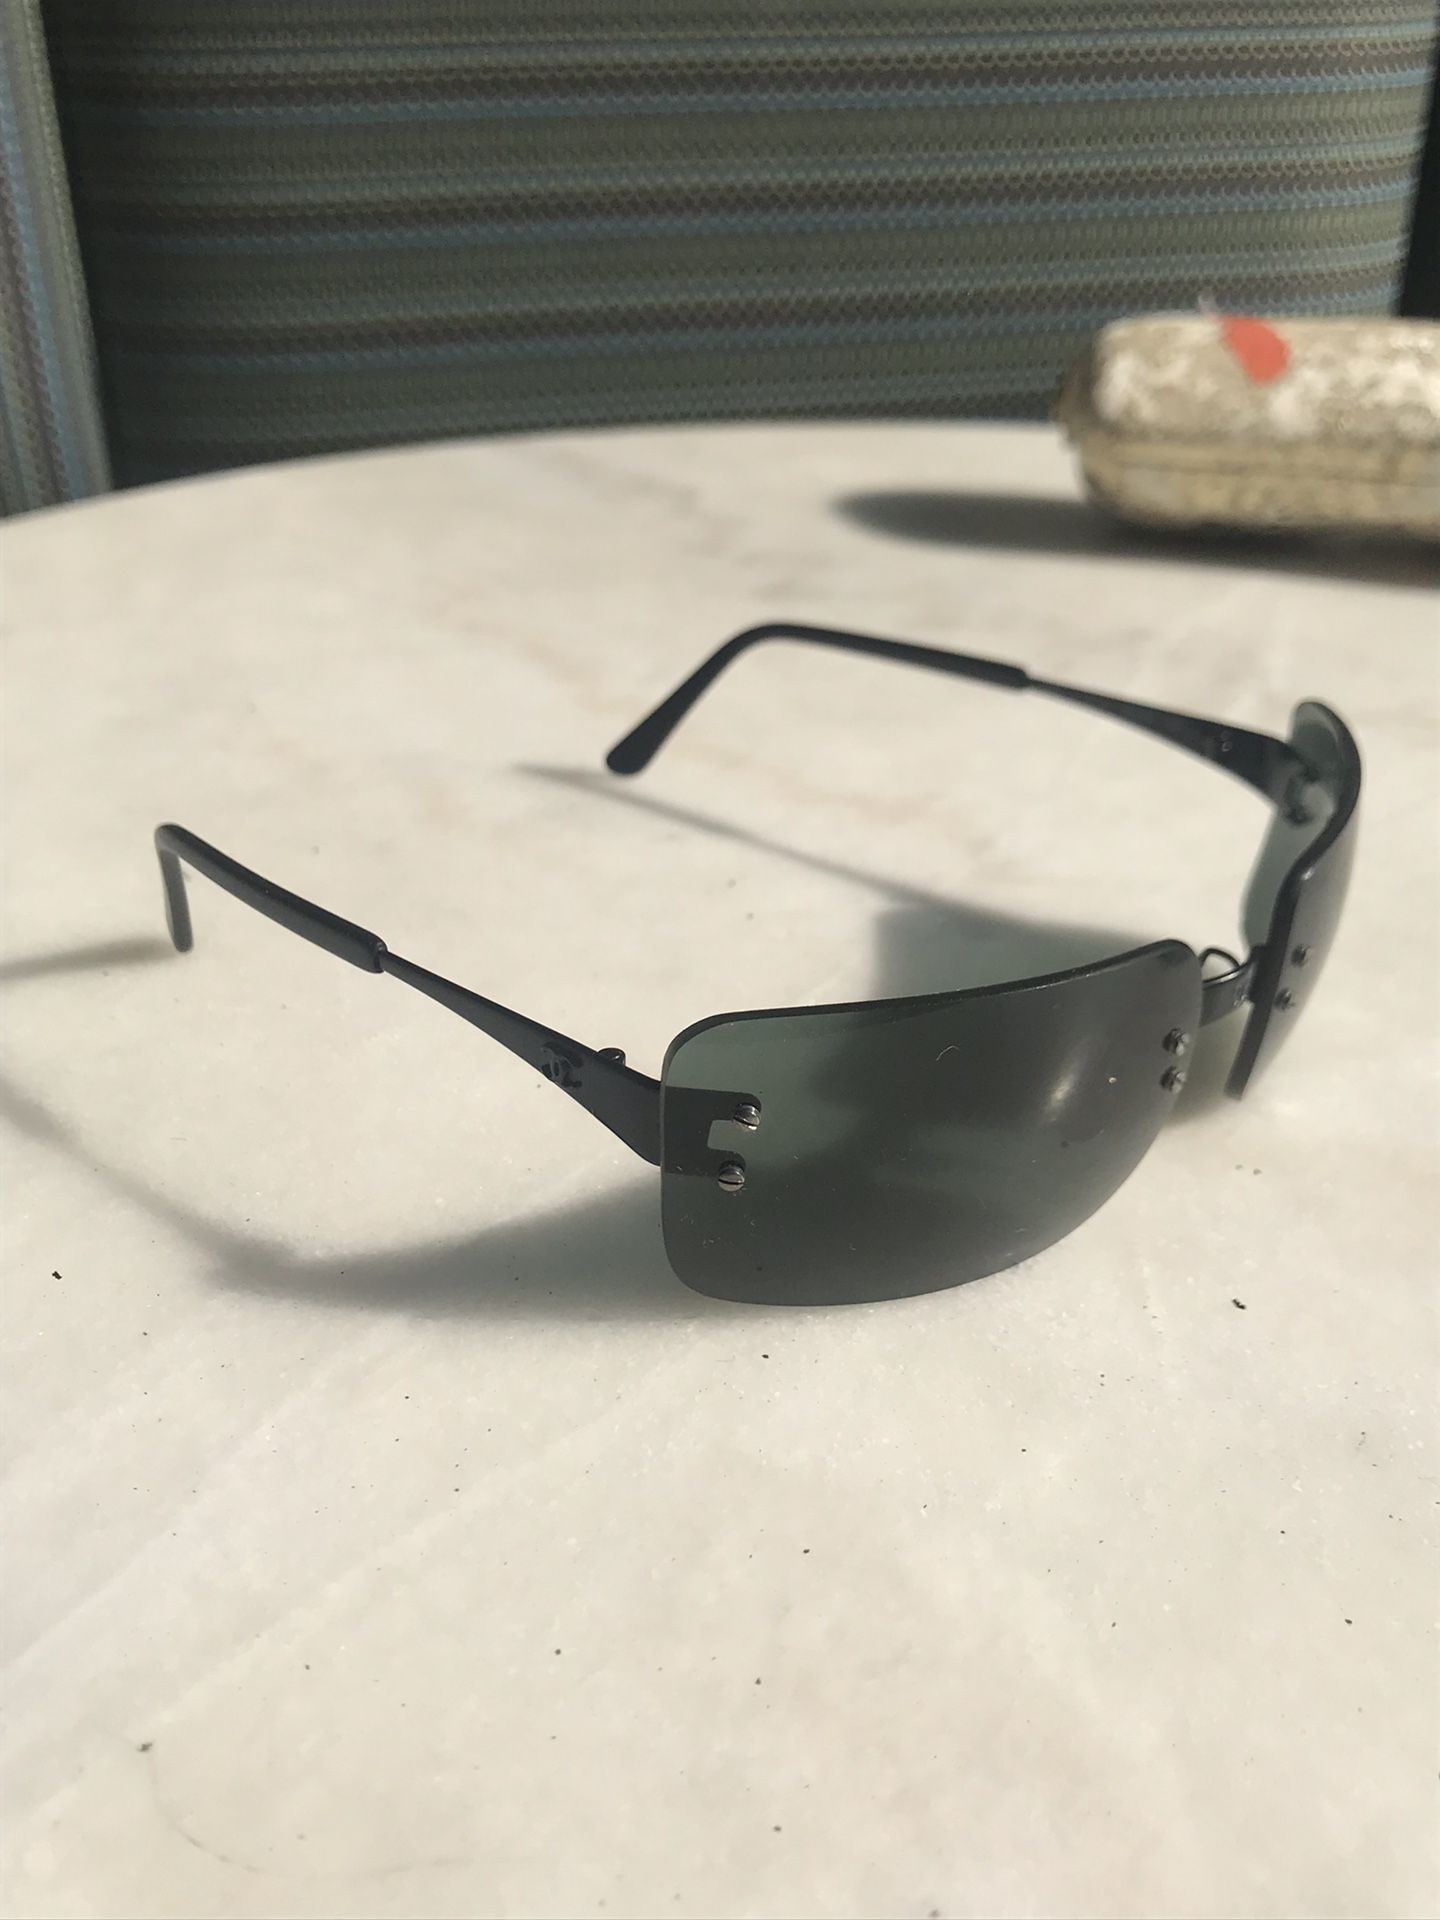 Chanel Black Classic Sunglasses for Sale in Los Angeles, CA - OfferUp